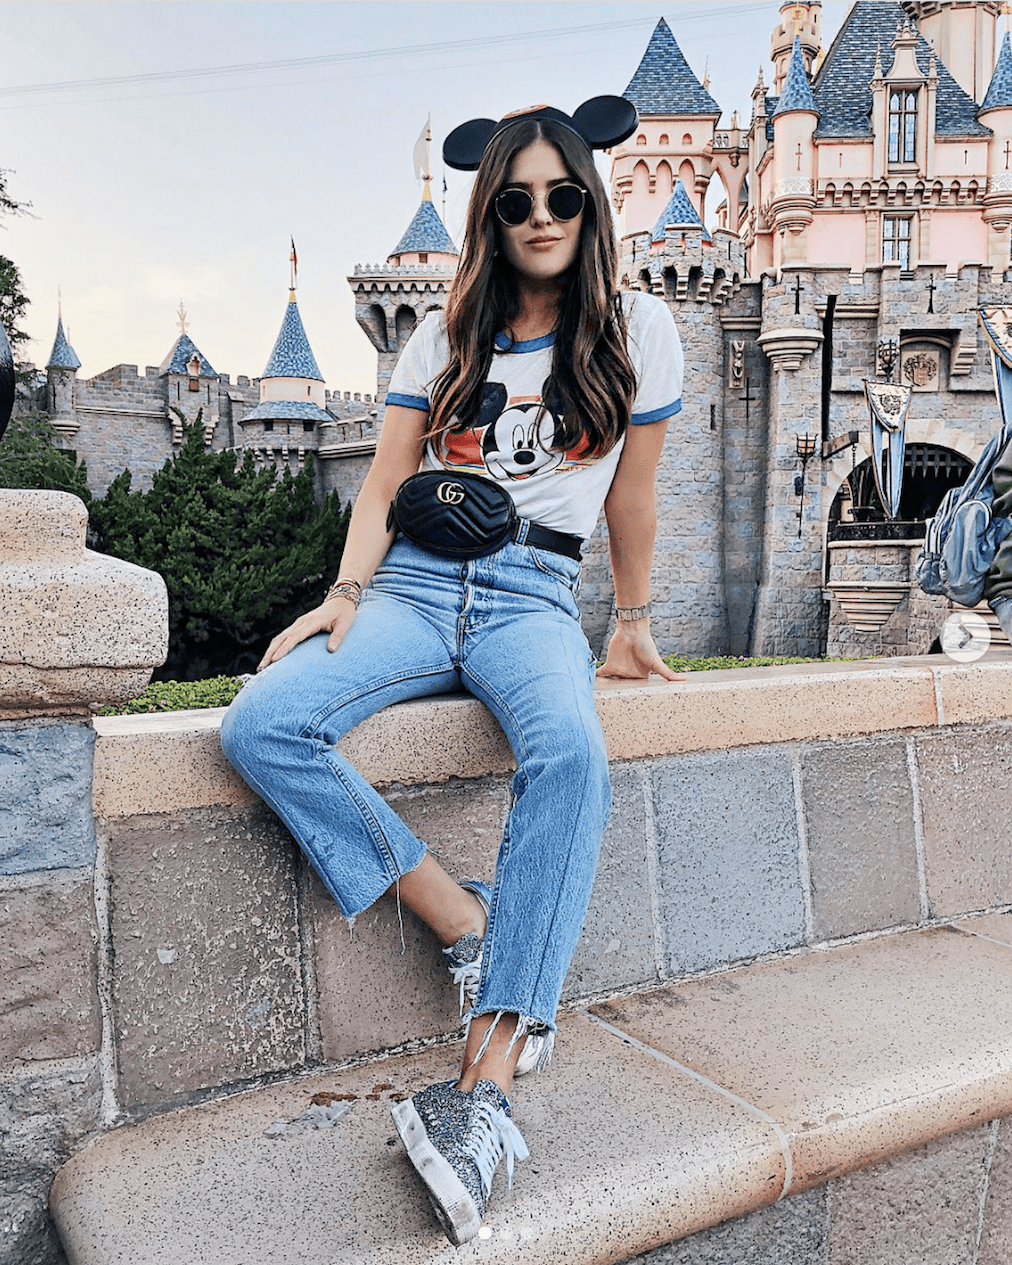 Girl at Disney wearing Black Mickey Mouse ears, jeans, silver glitter sneakers, a white Mickey Mouse tee and a black Gucci belt bag.